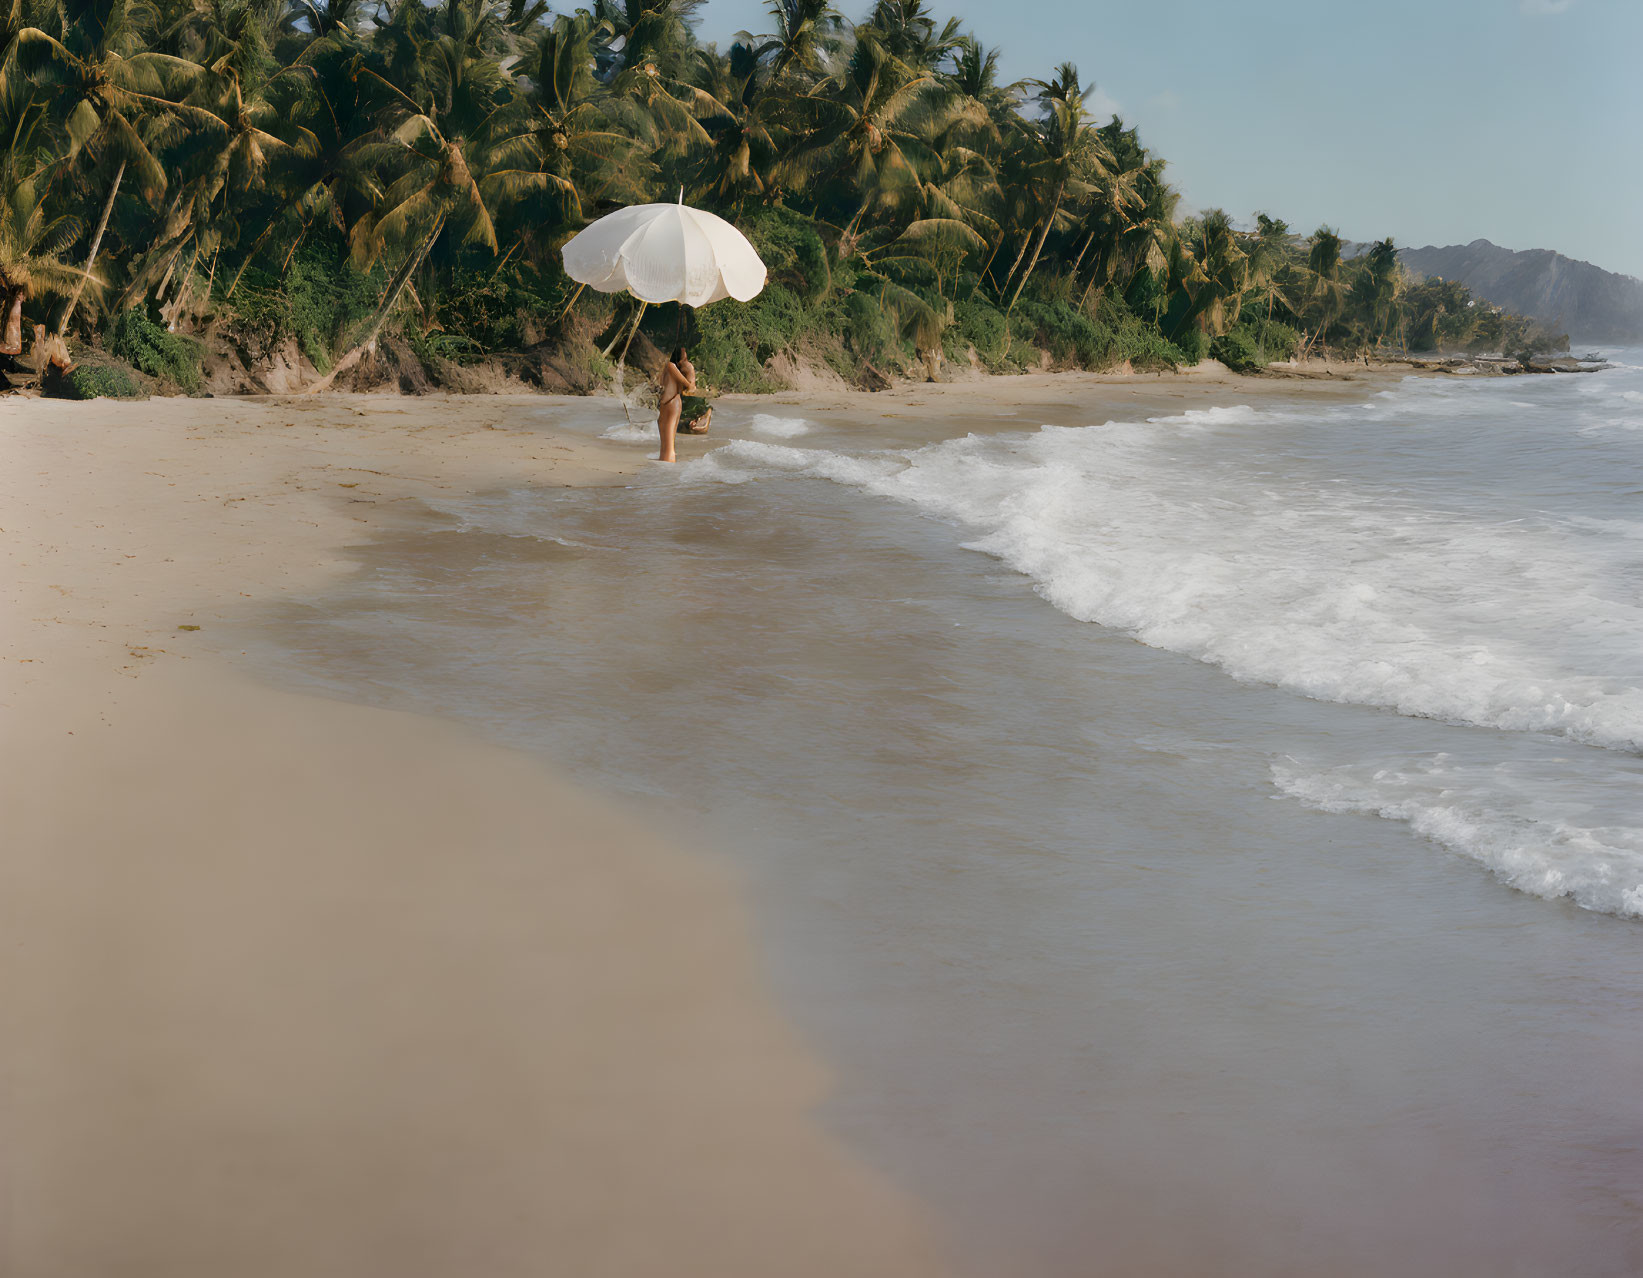 Person with white umbrella on sandy beach with palm trees and hills in background